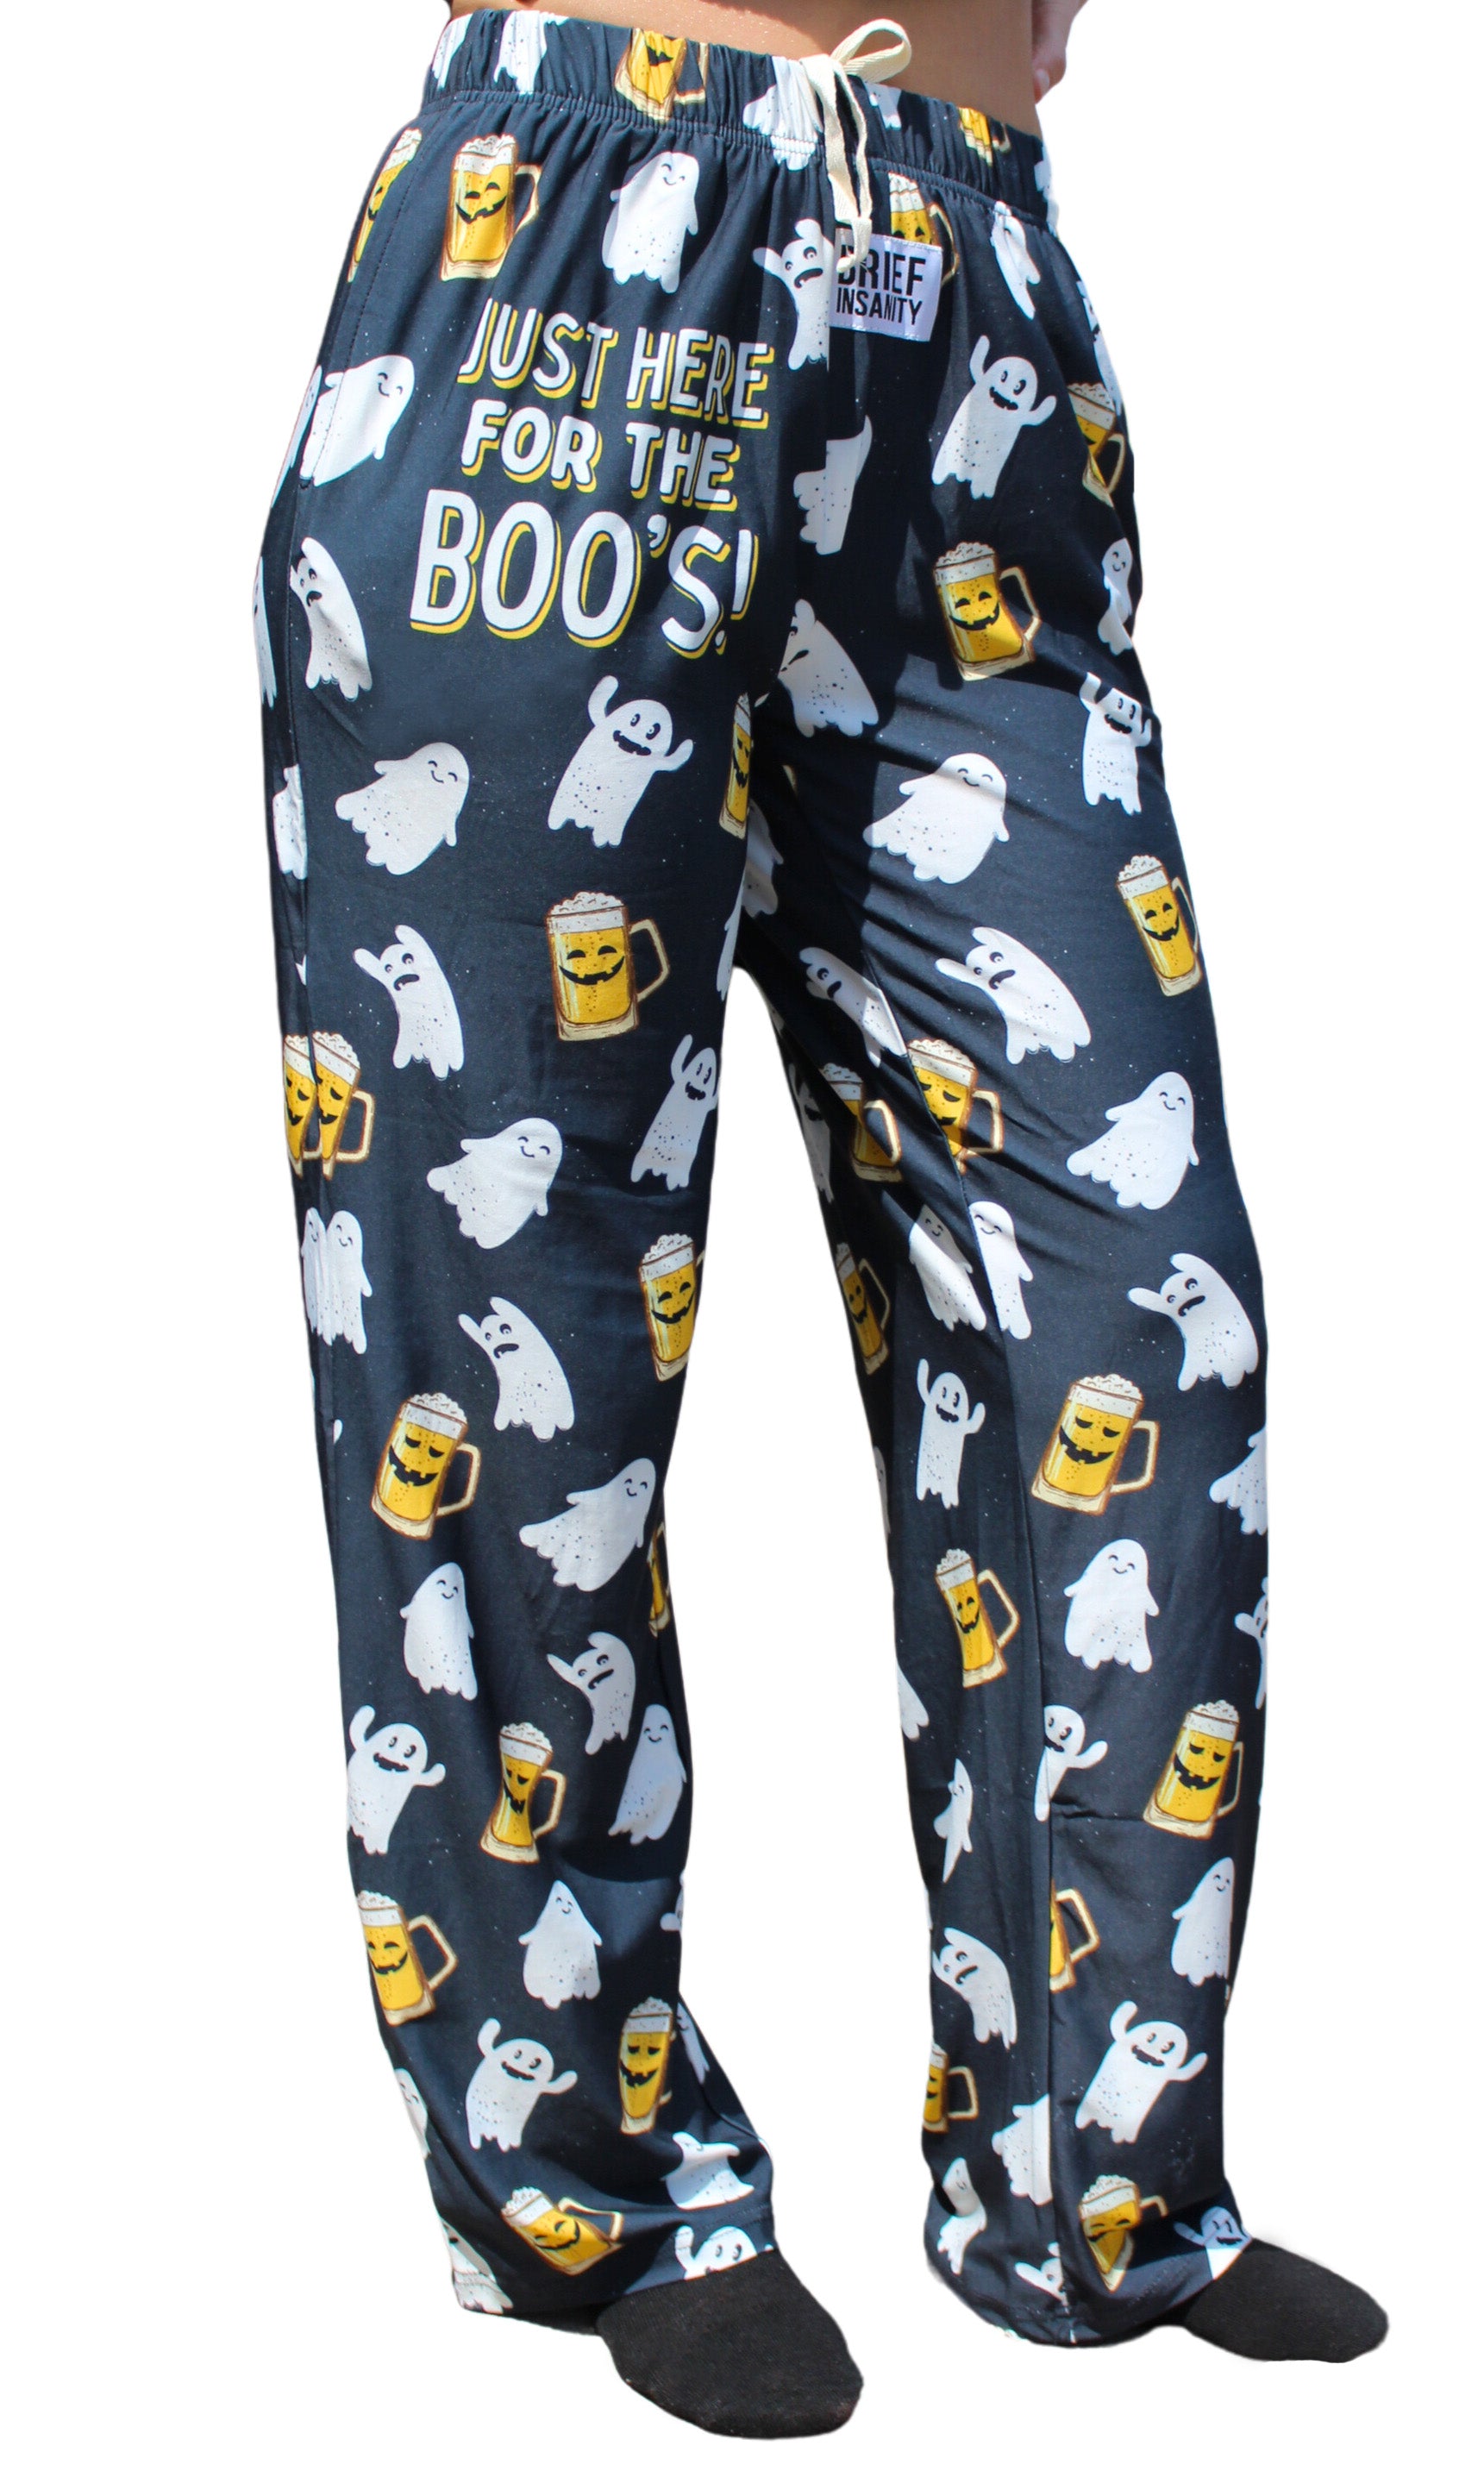 Just Here For the Boo's! Pajama Lounge Pants right side view on model (waist down)